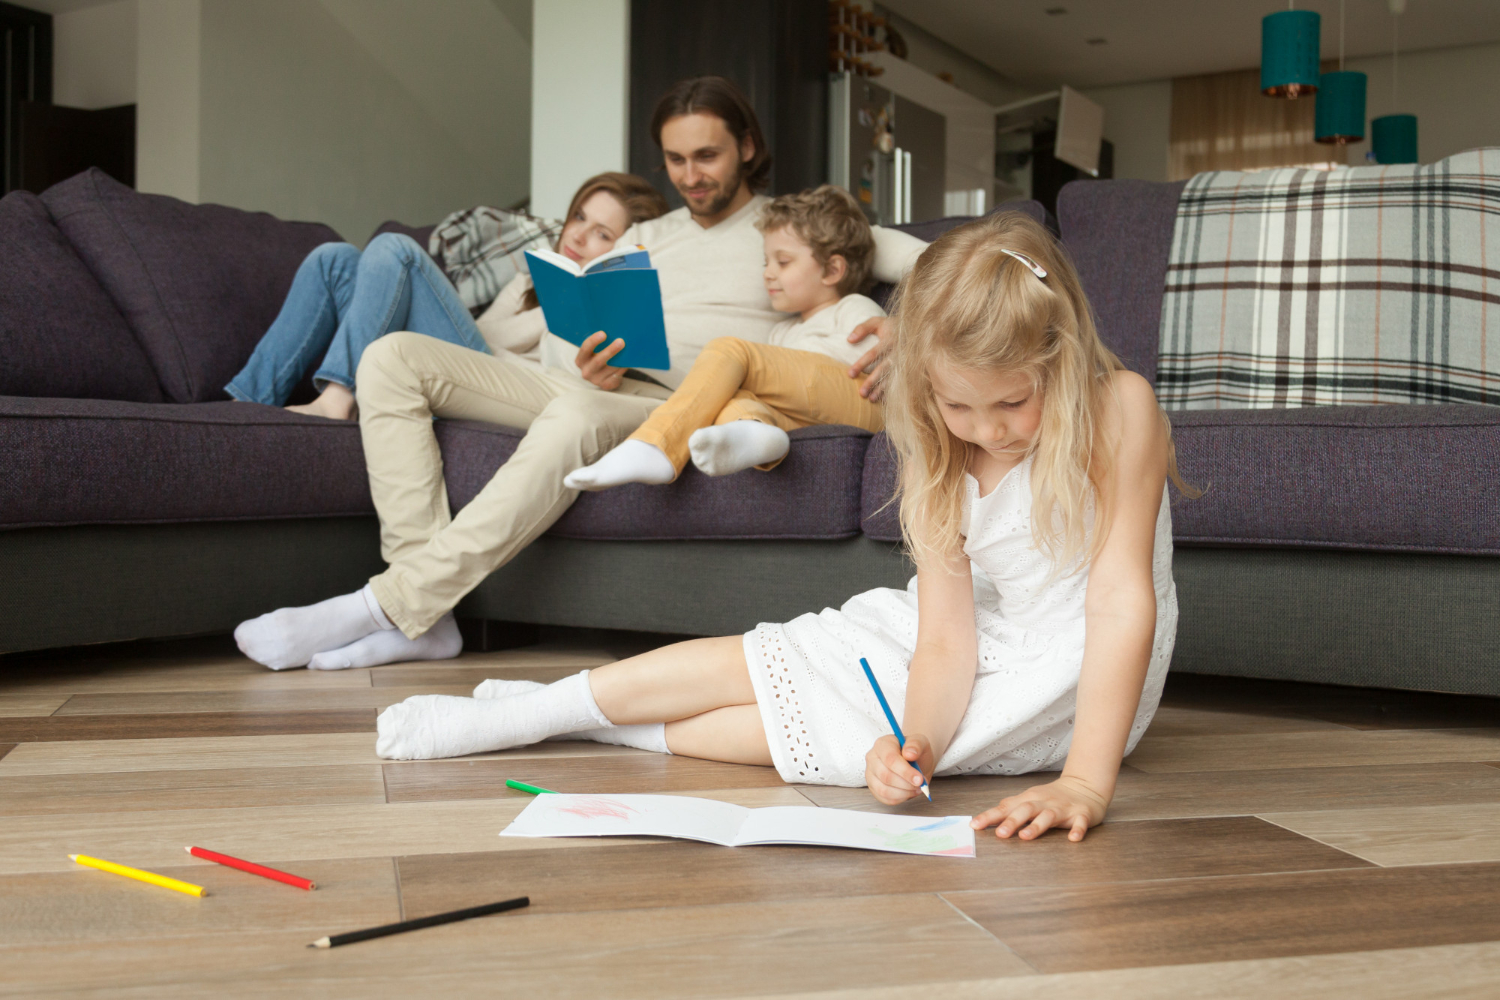 daughter-playing-floor-while-parents-son-reading-book (1)